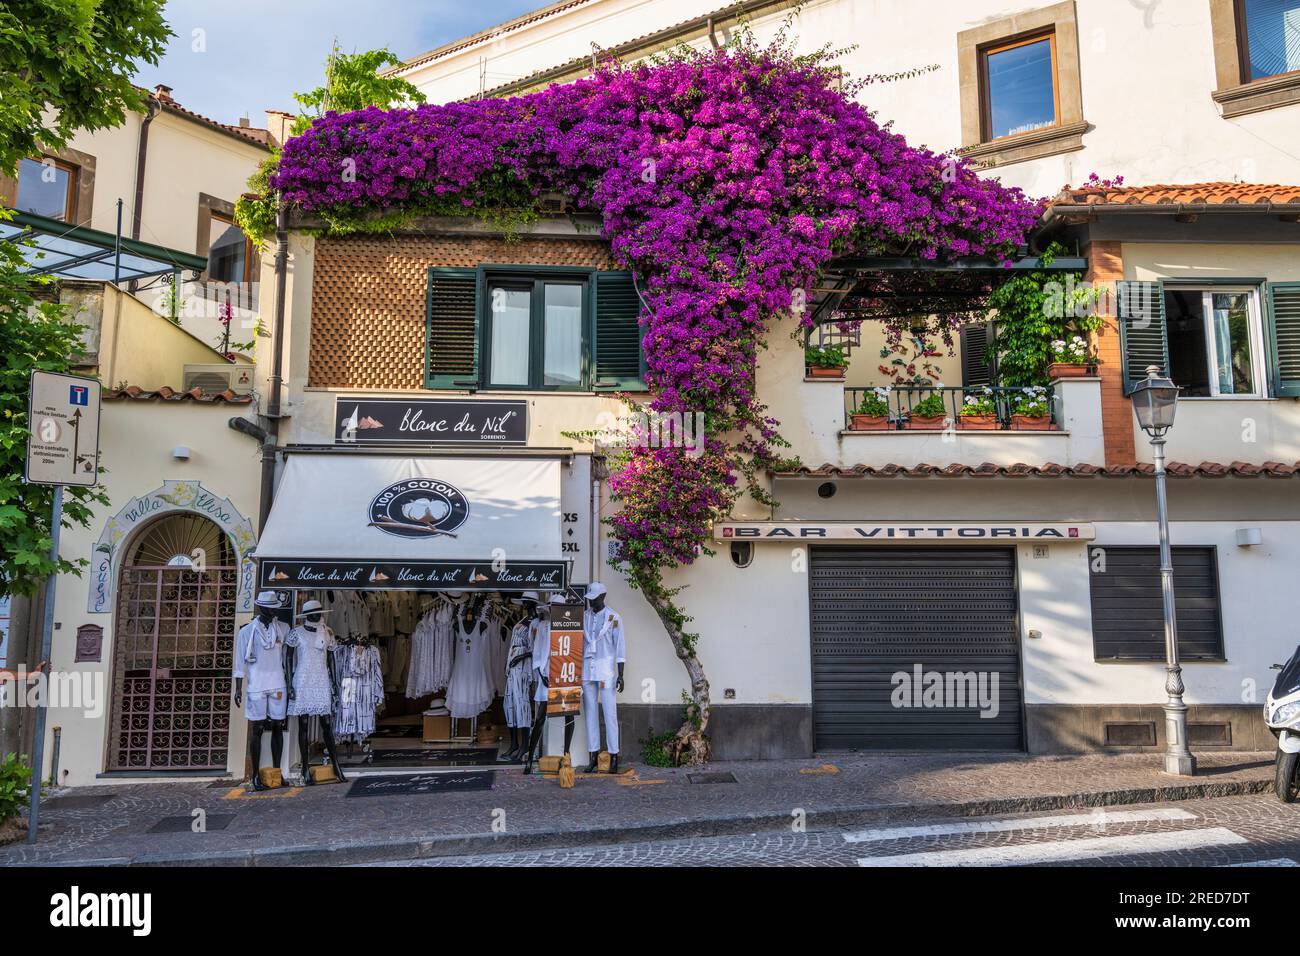 Blanc du Nil boutique and Bar Vittoria on Piazza Sant' Antonino in Sorrento in the Campania Region of Southwest Italy Stock Photo